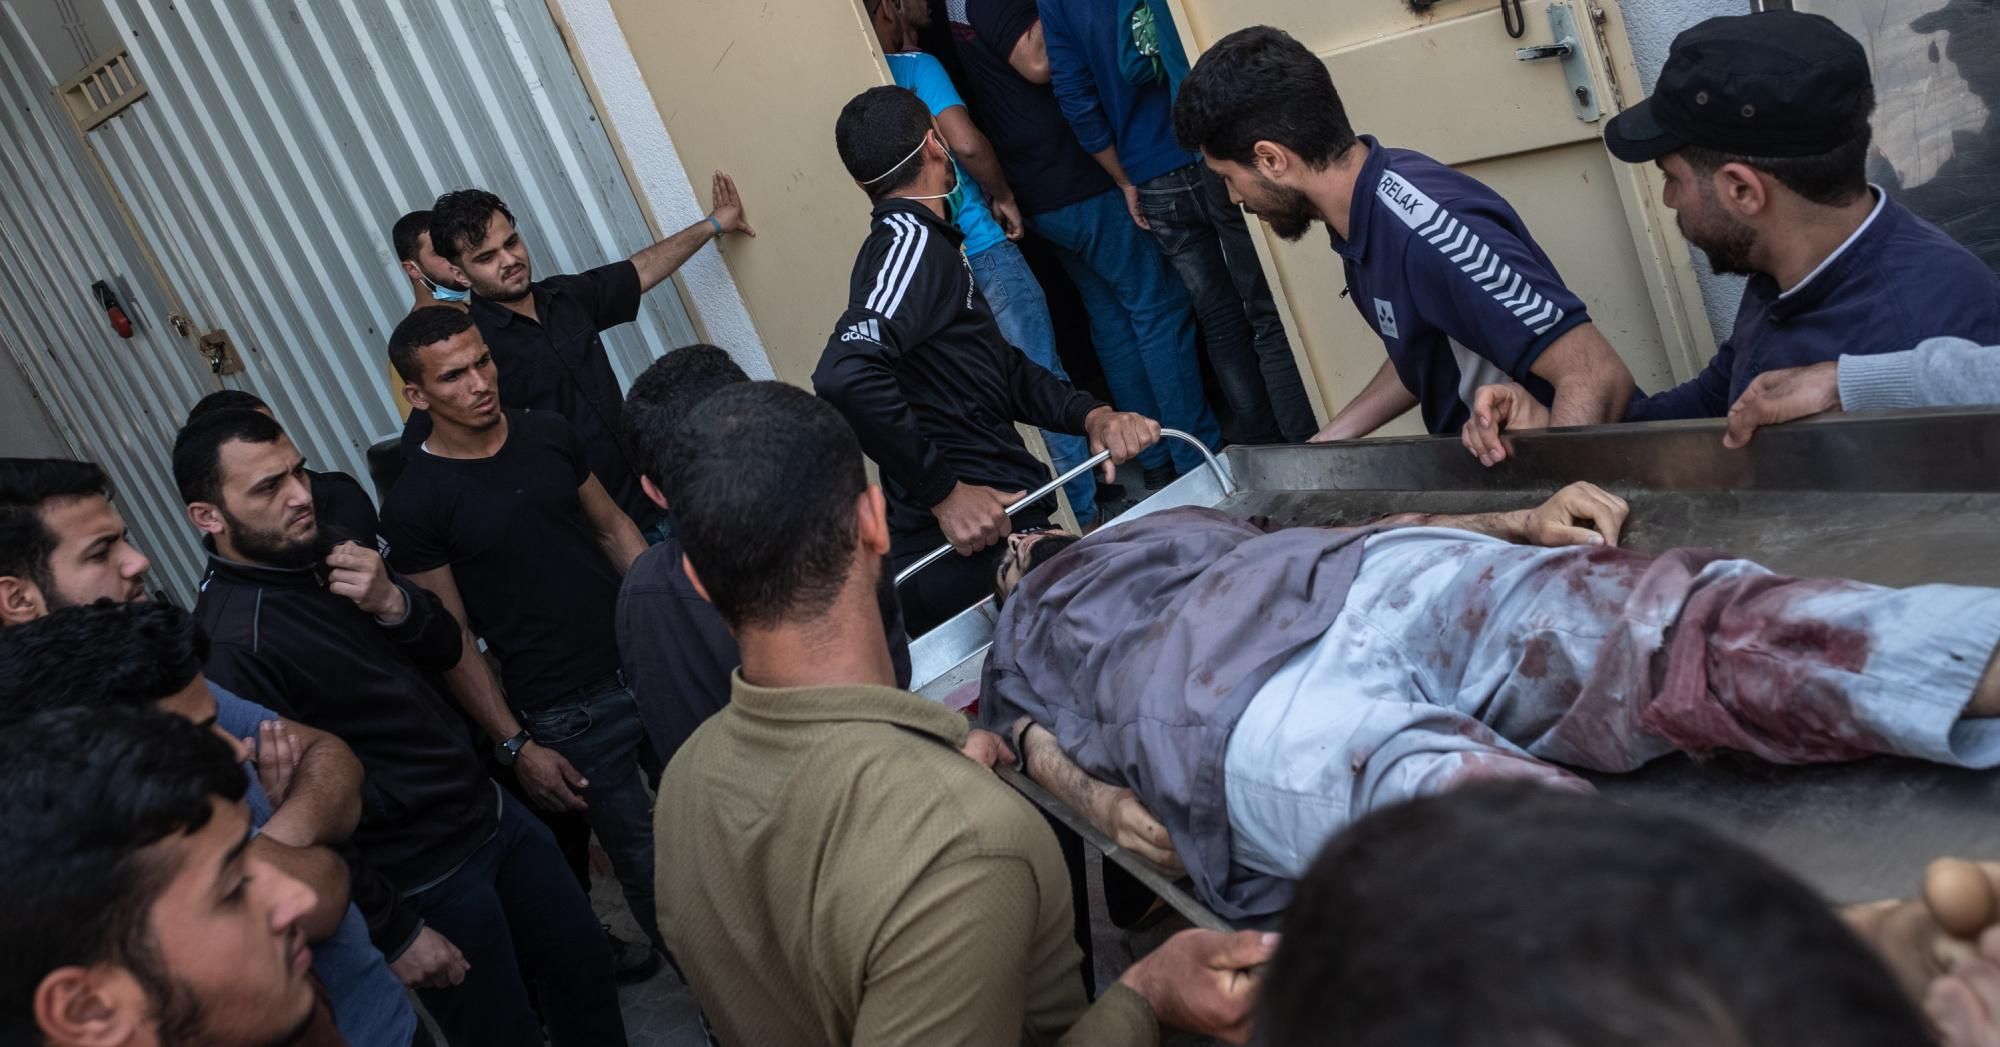 The body of a Palestinian man named Ahmed Al-Shenbari, who was killed during an Israeli raid on Beit Hanoun City, is taken to a mortuary on May 11, 2021 in Gaza. (Photo: Fatima Shbair via Getty Images)